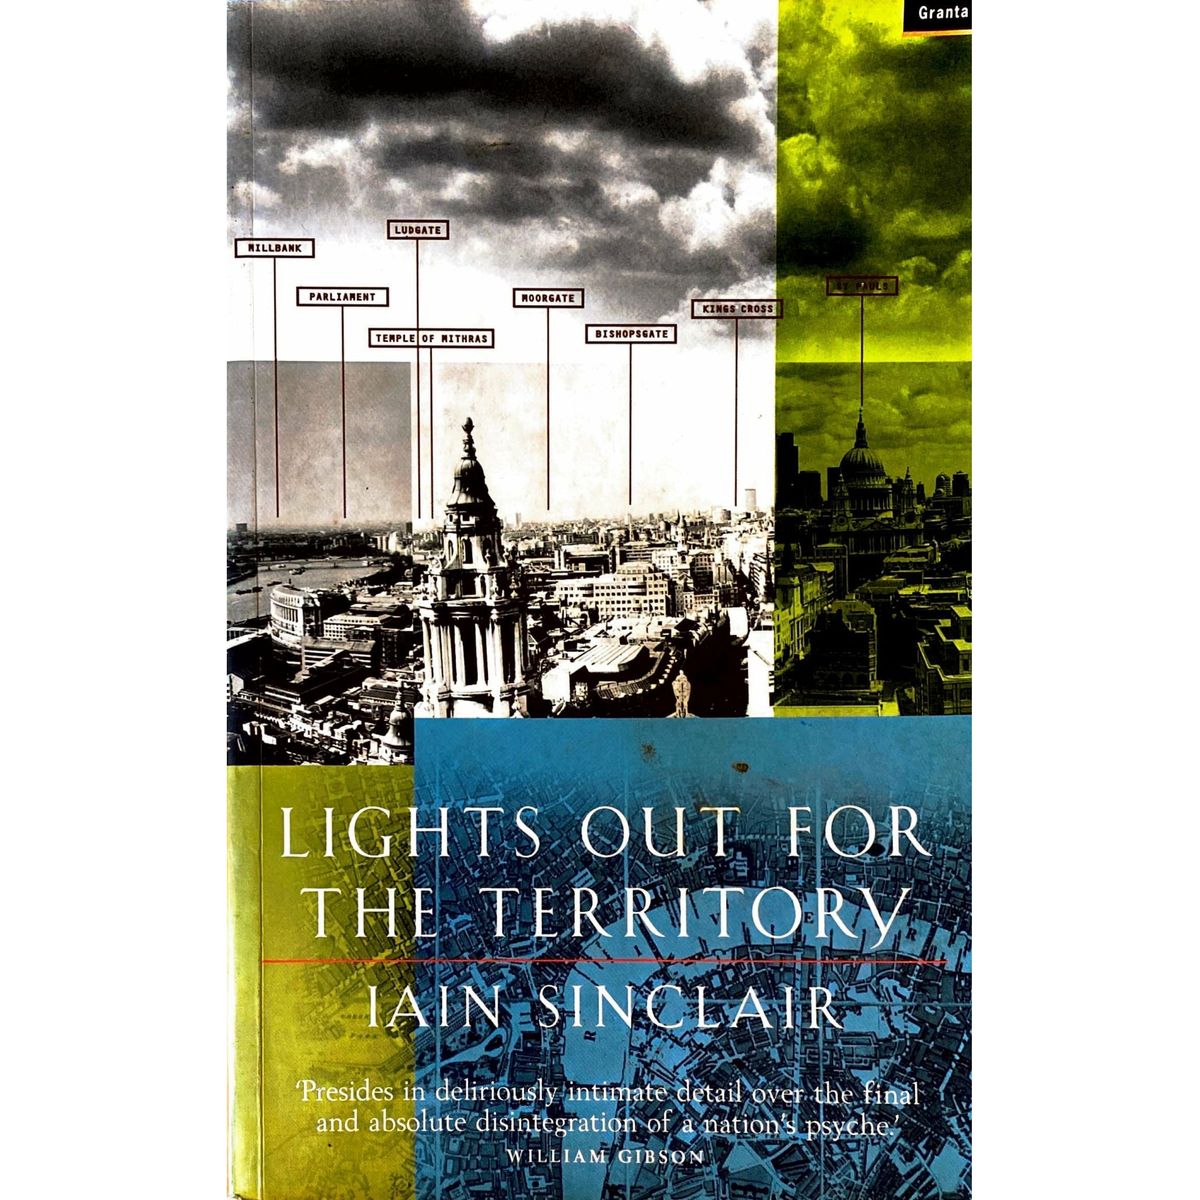 ISBN: 9781862070097 / 1862070091 - Lights Out for the Territory by Iain Sinclair [1997]